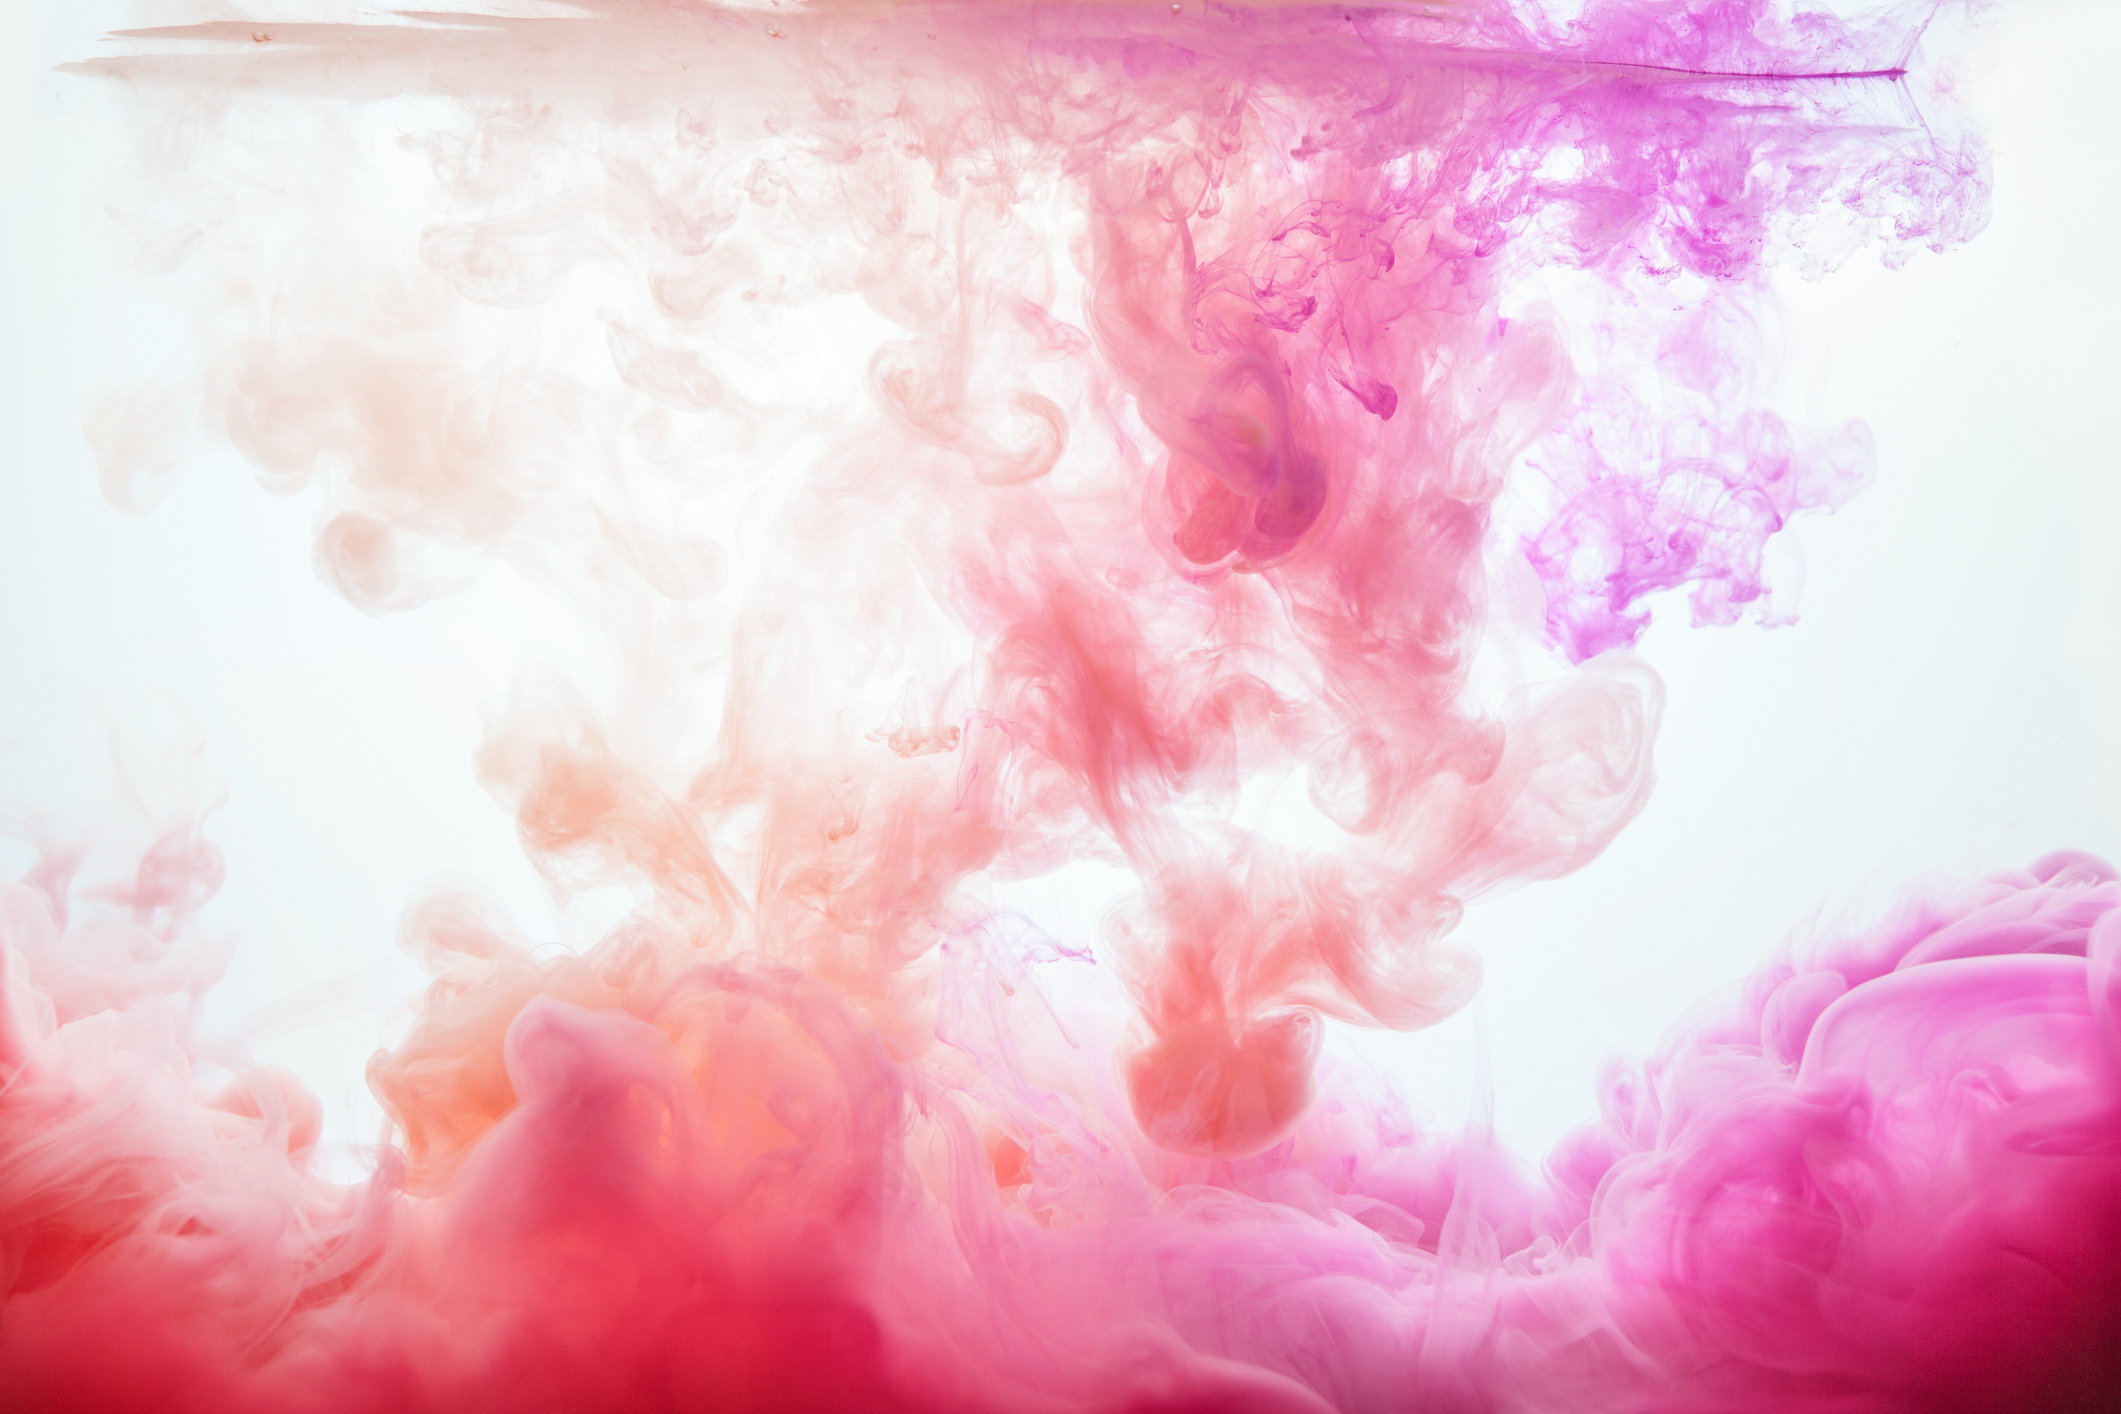 A flow of colourful pink paint (Thinkstock/PA)